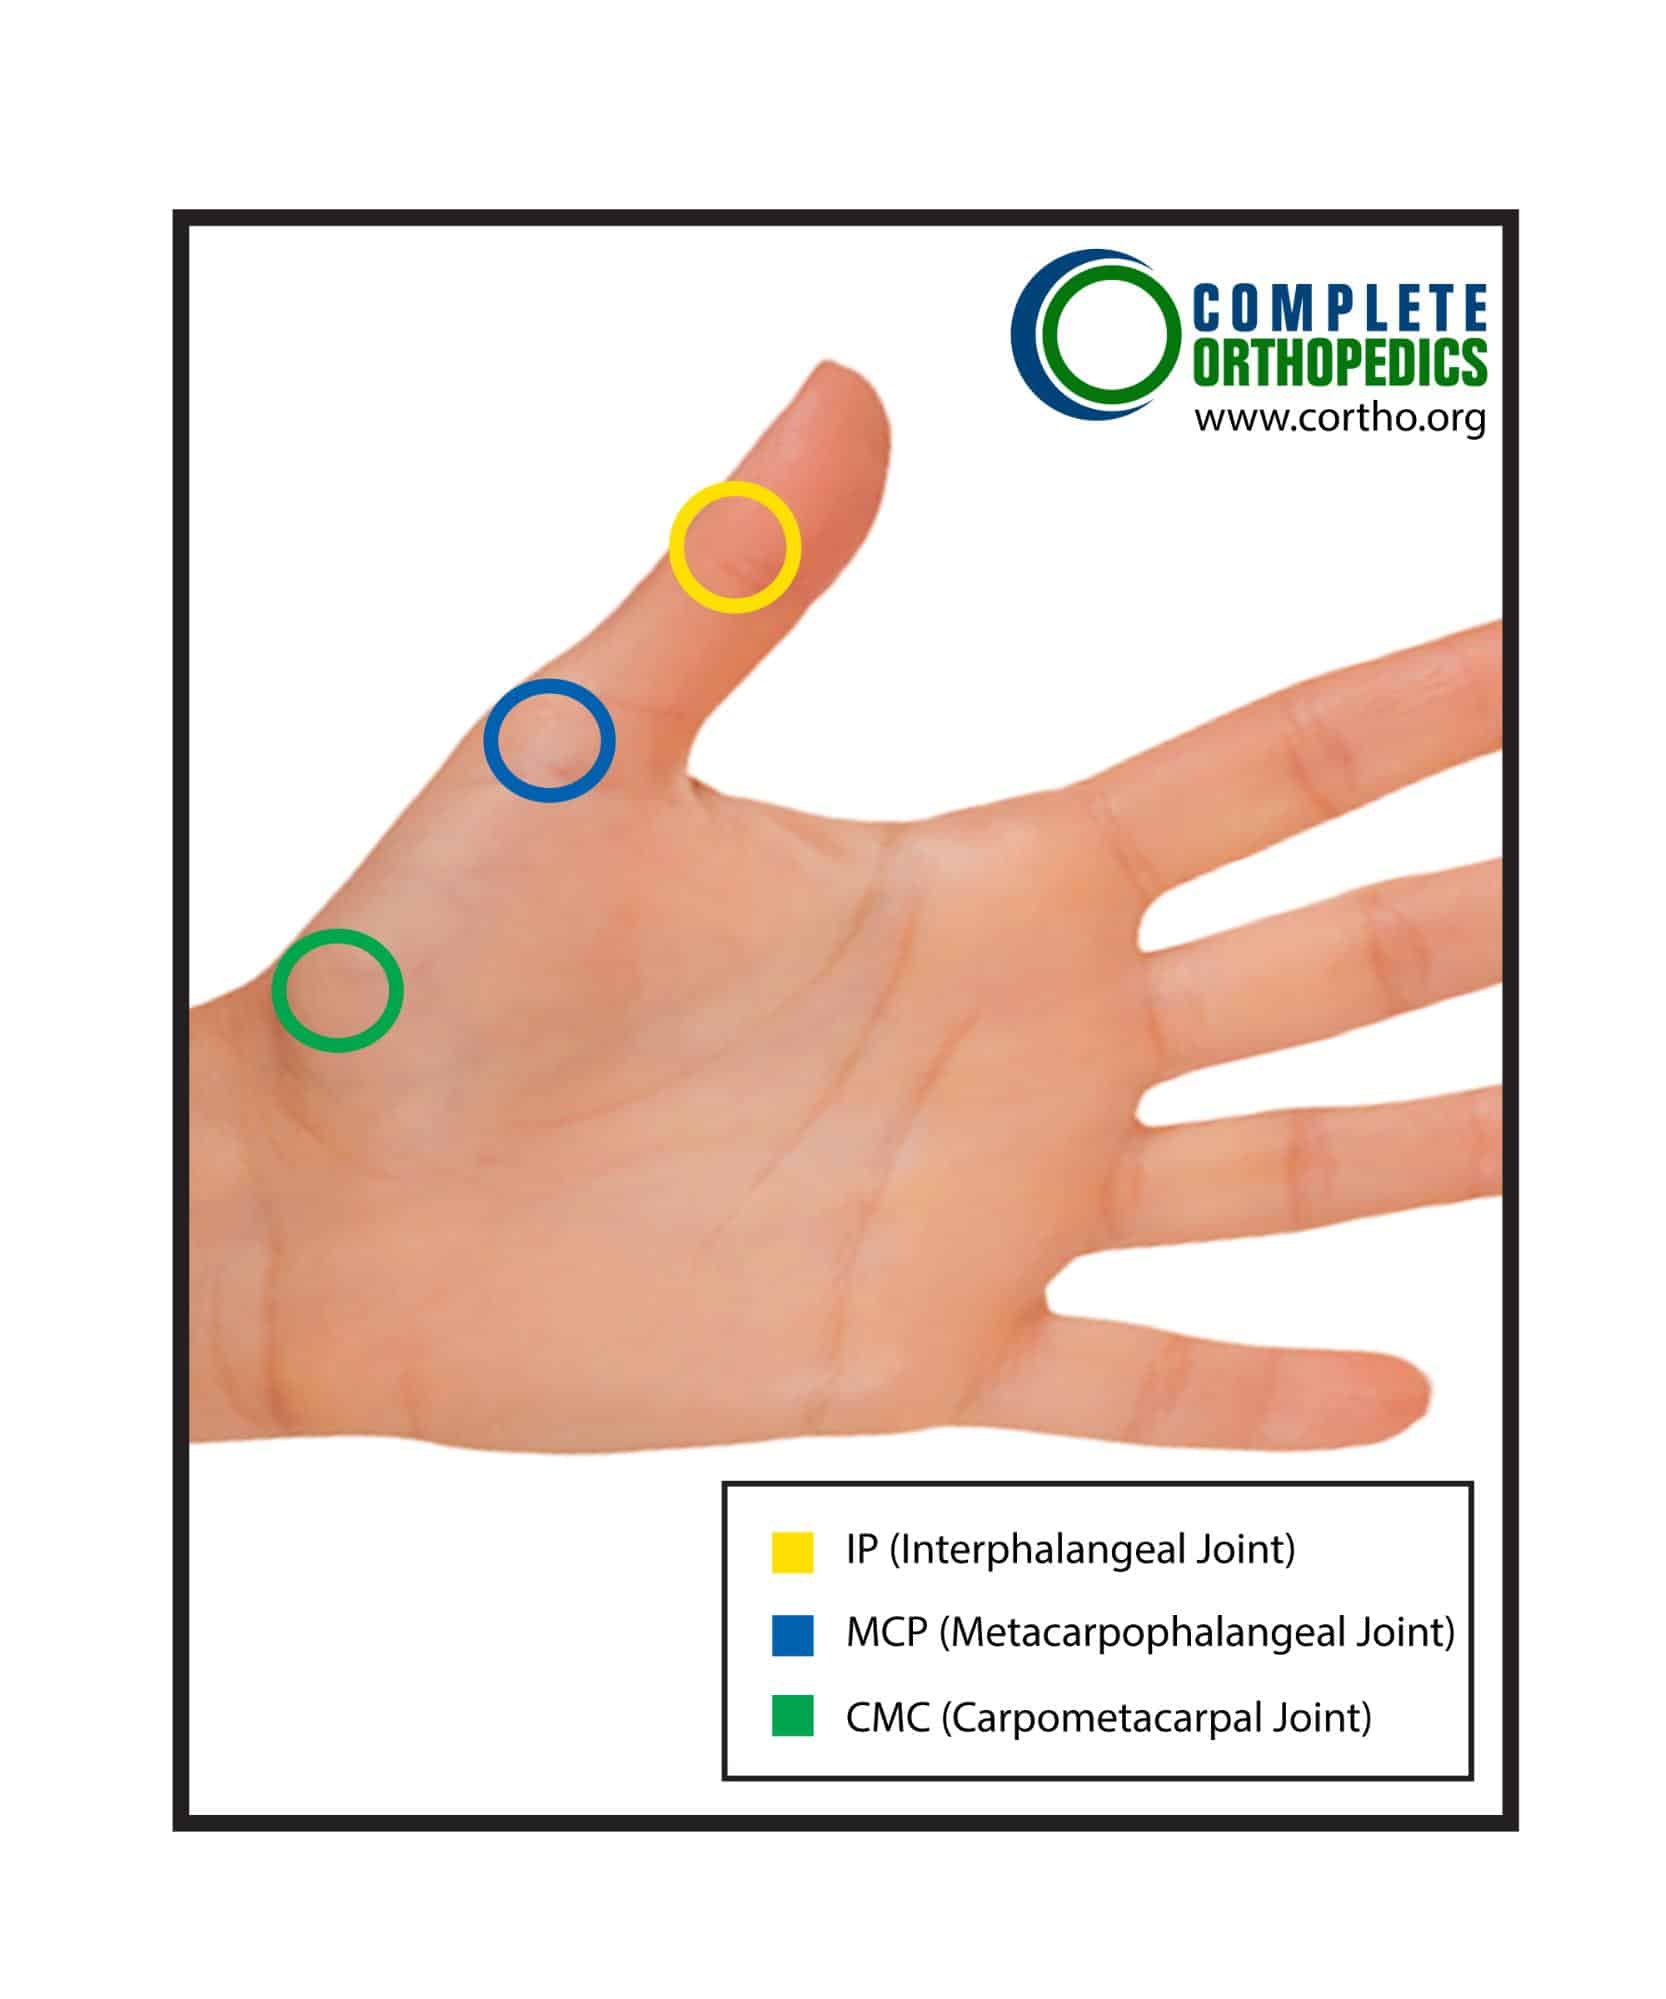 Measurement Position for Interphalangeal Joint (IP)